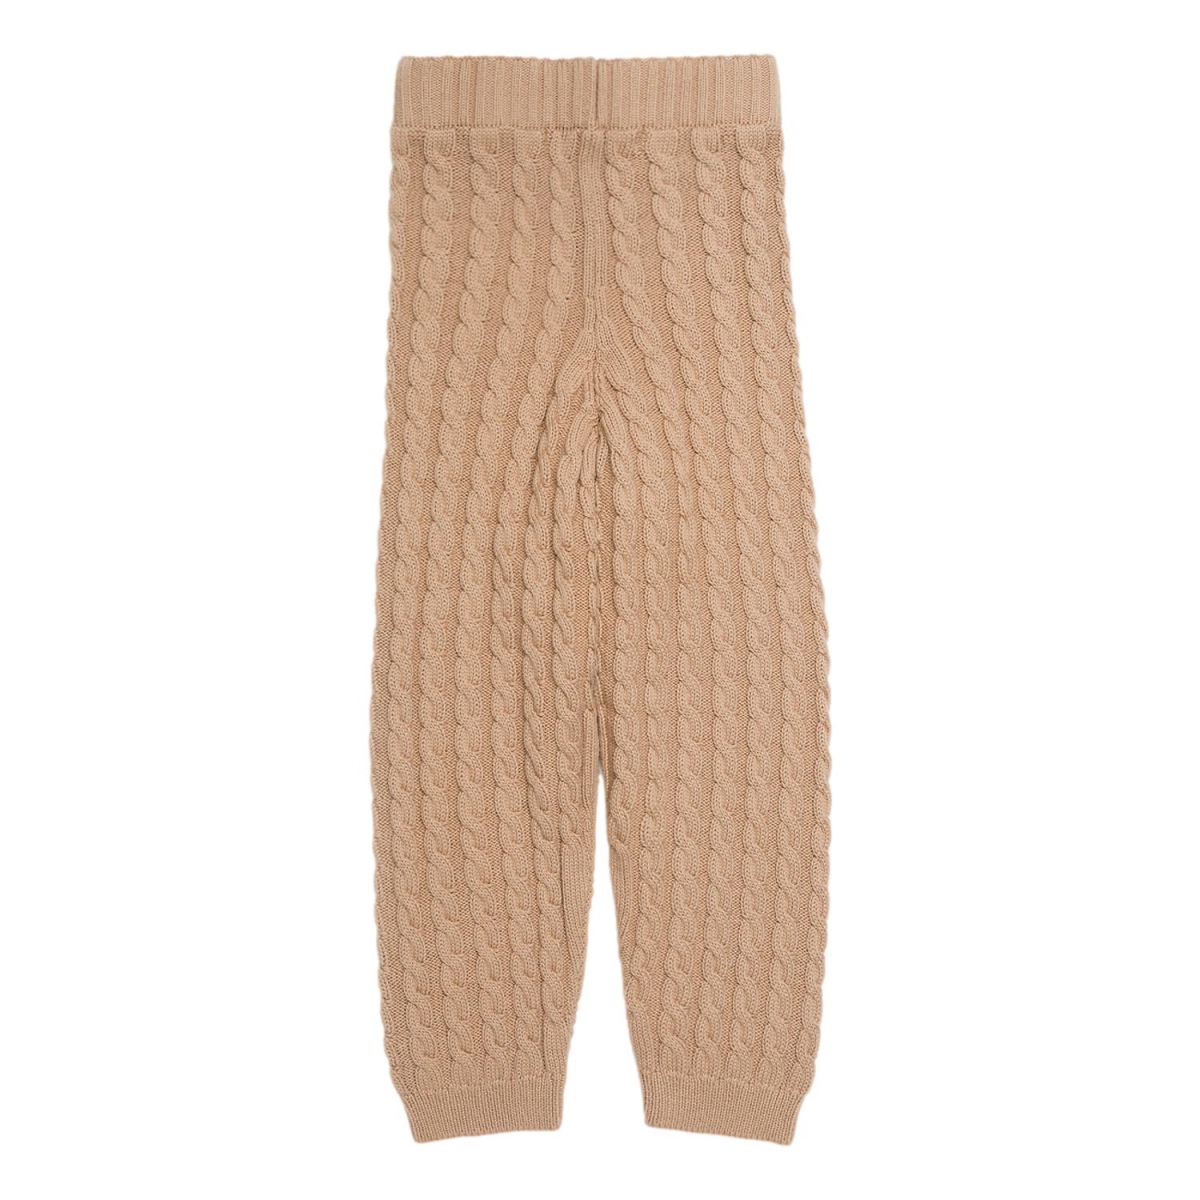 Weekend House Kids Apple cable knit pants brown 312 